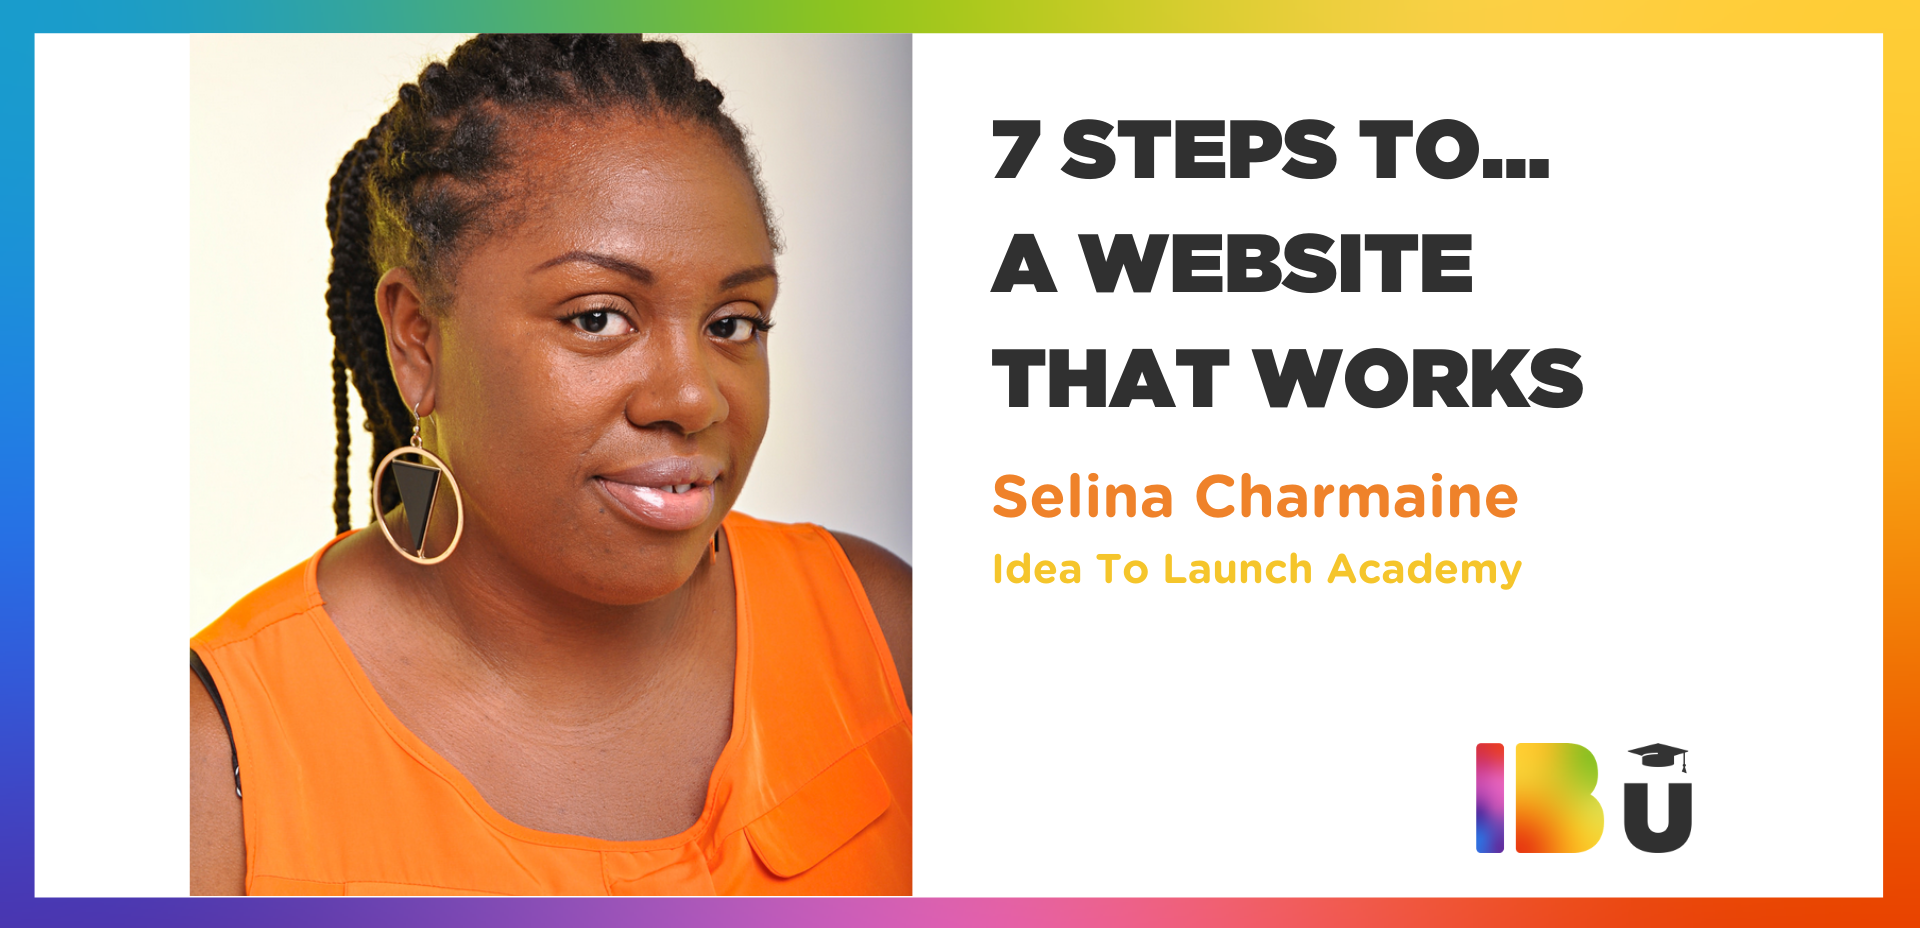 7 Steps To A Website That Works with Selina Charmaine